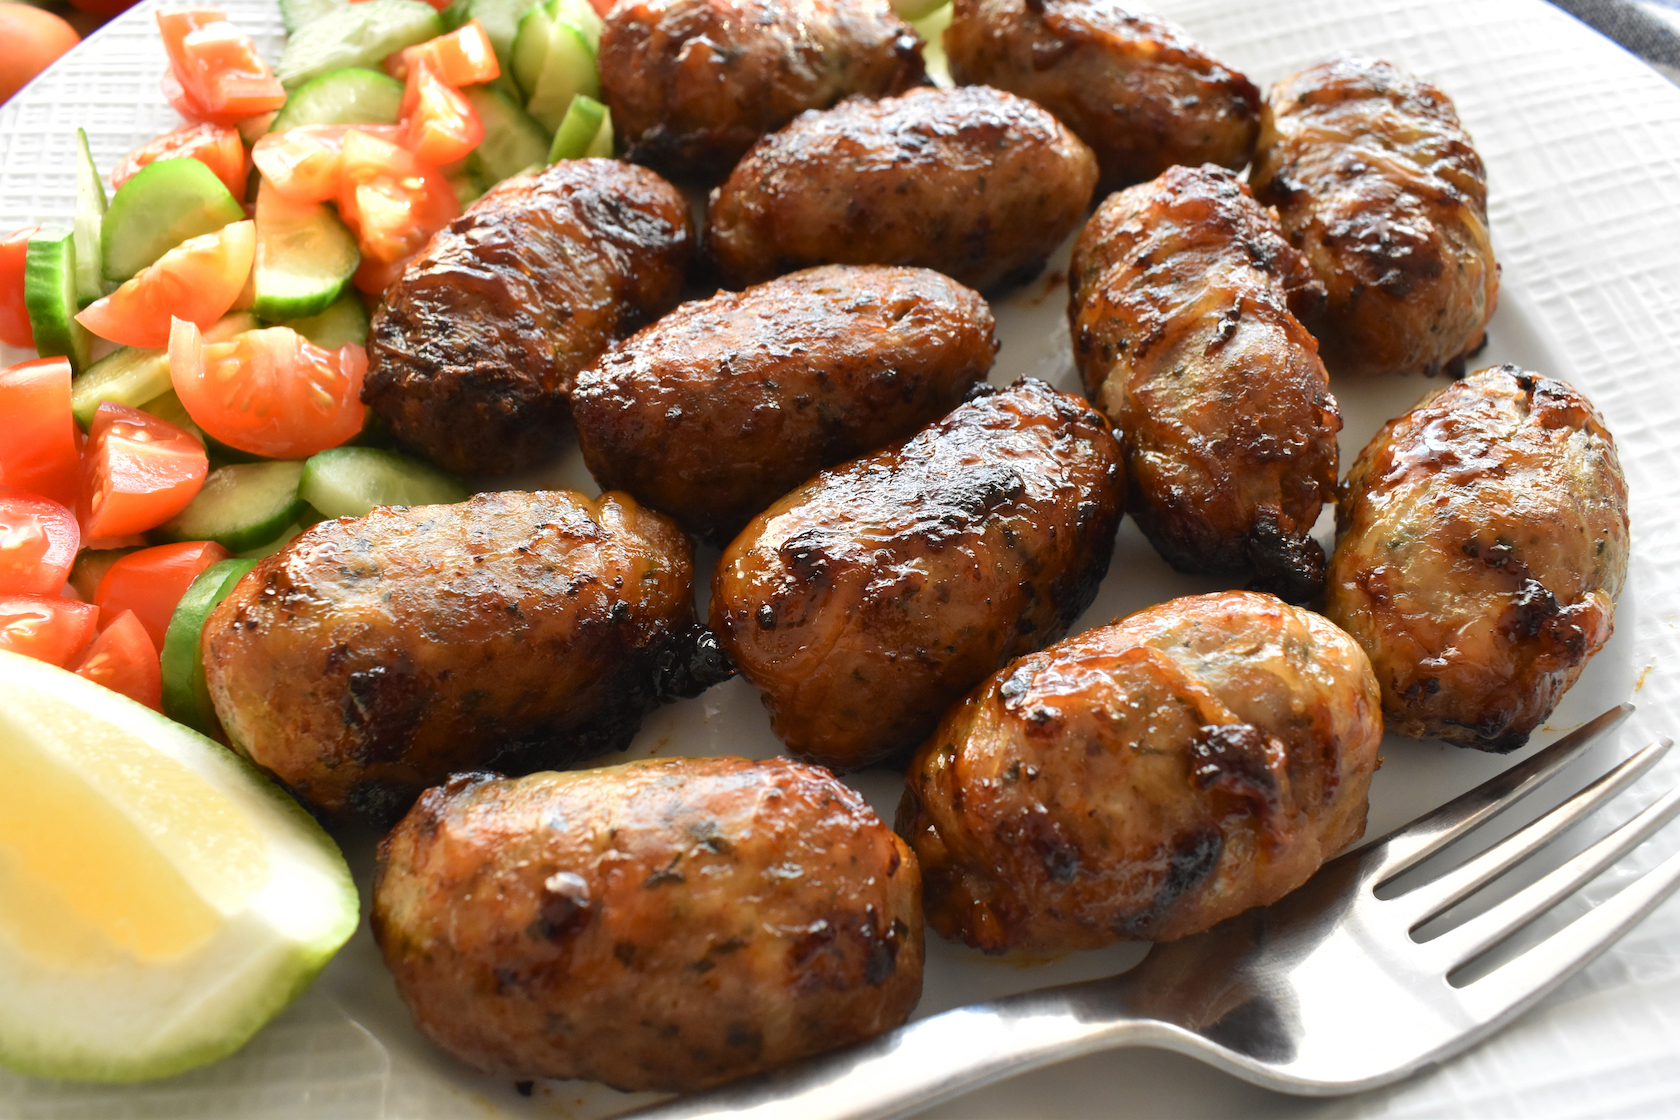 Sheftalia : Cypriot Lamb and Pork Sausages. Grilled Sausages with Fresh Vegetables (Cucumber and Tomato) on a White Plate. Traditional Cypriot food.